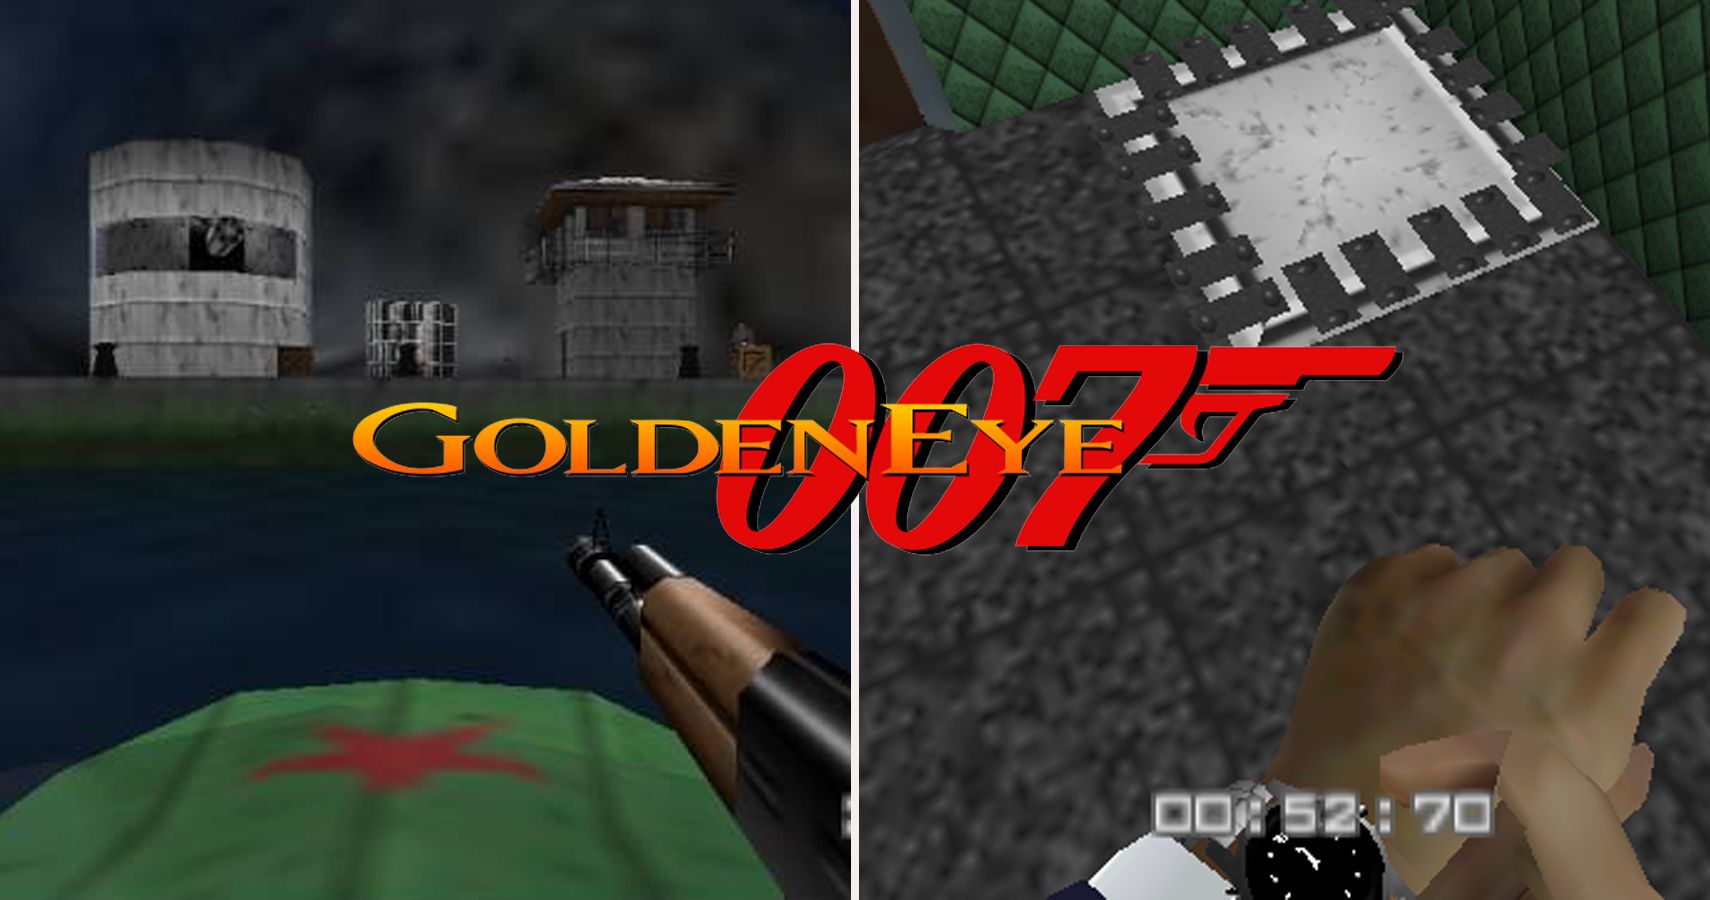 After 25 years, GoldenEye 007 gets its first modern rerelease